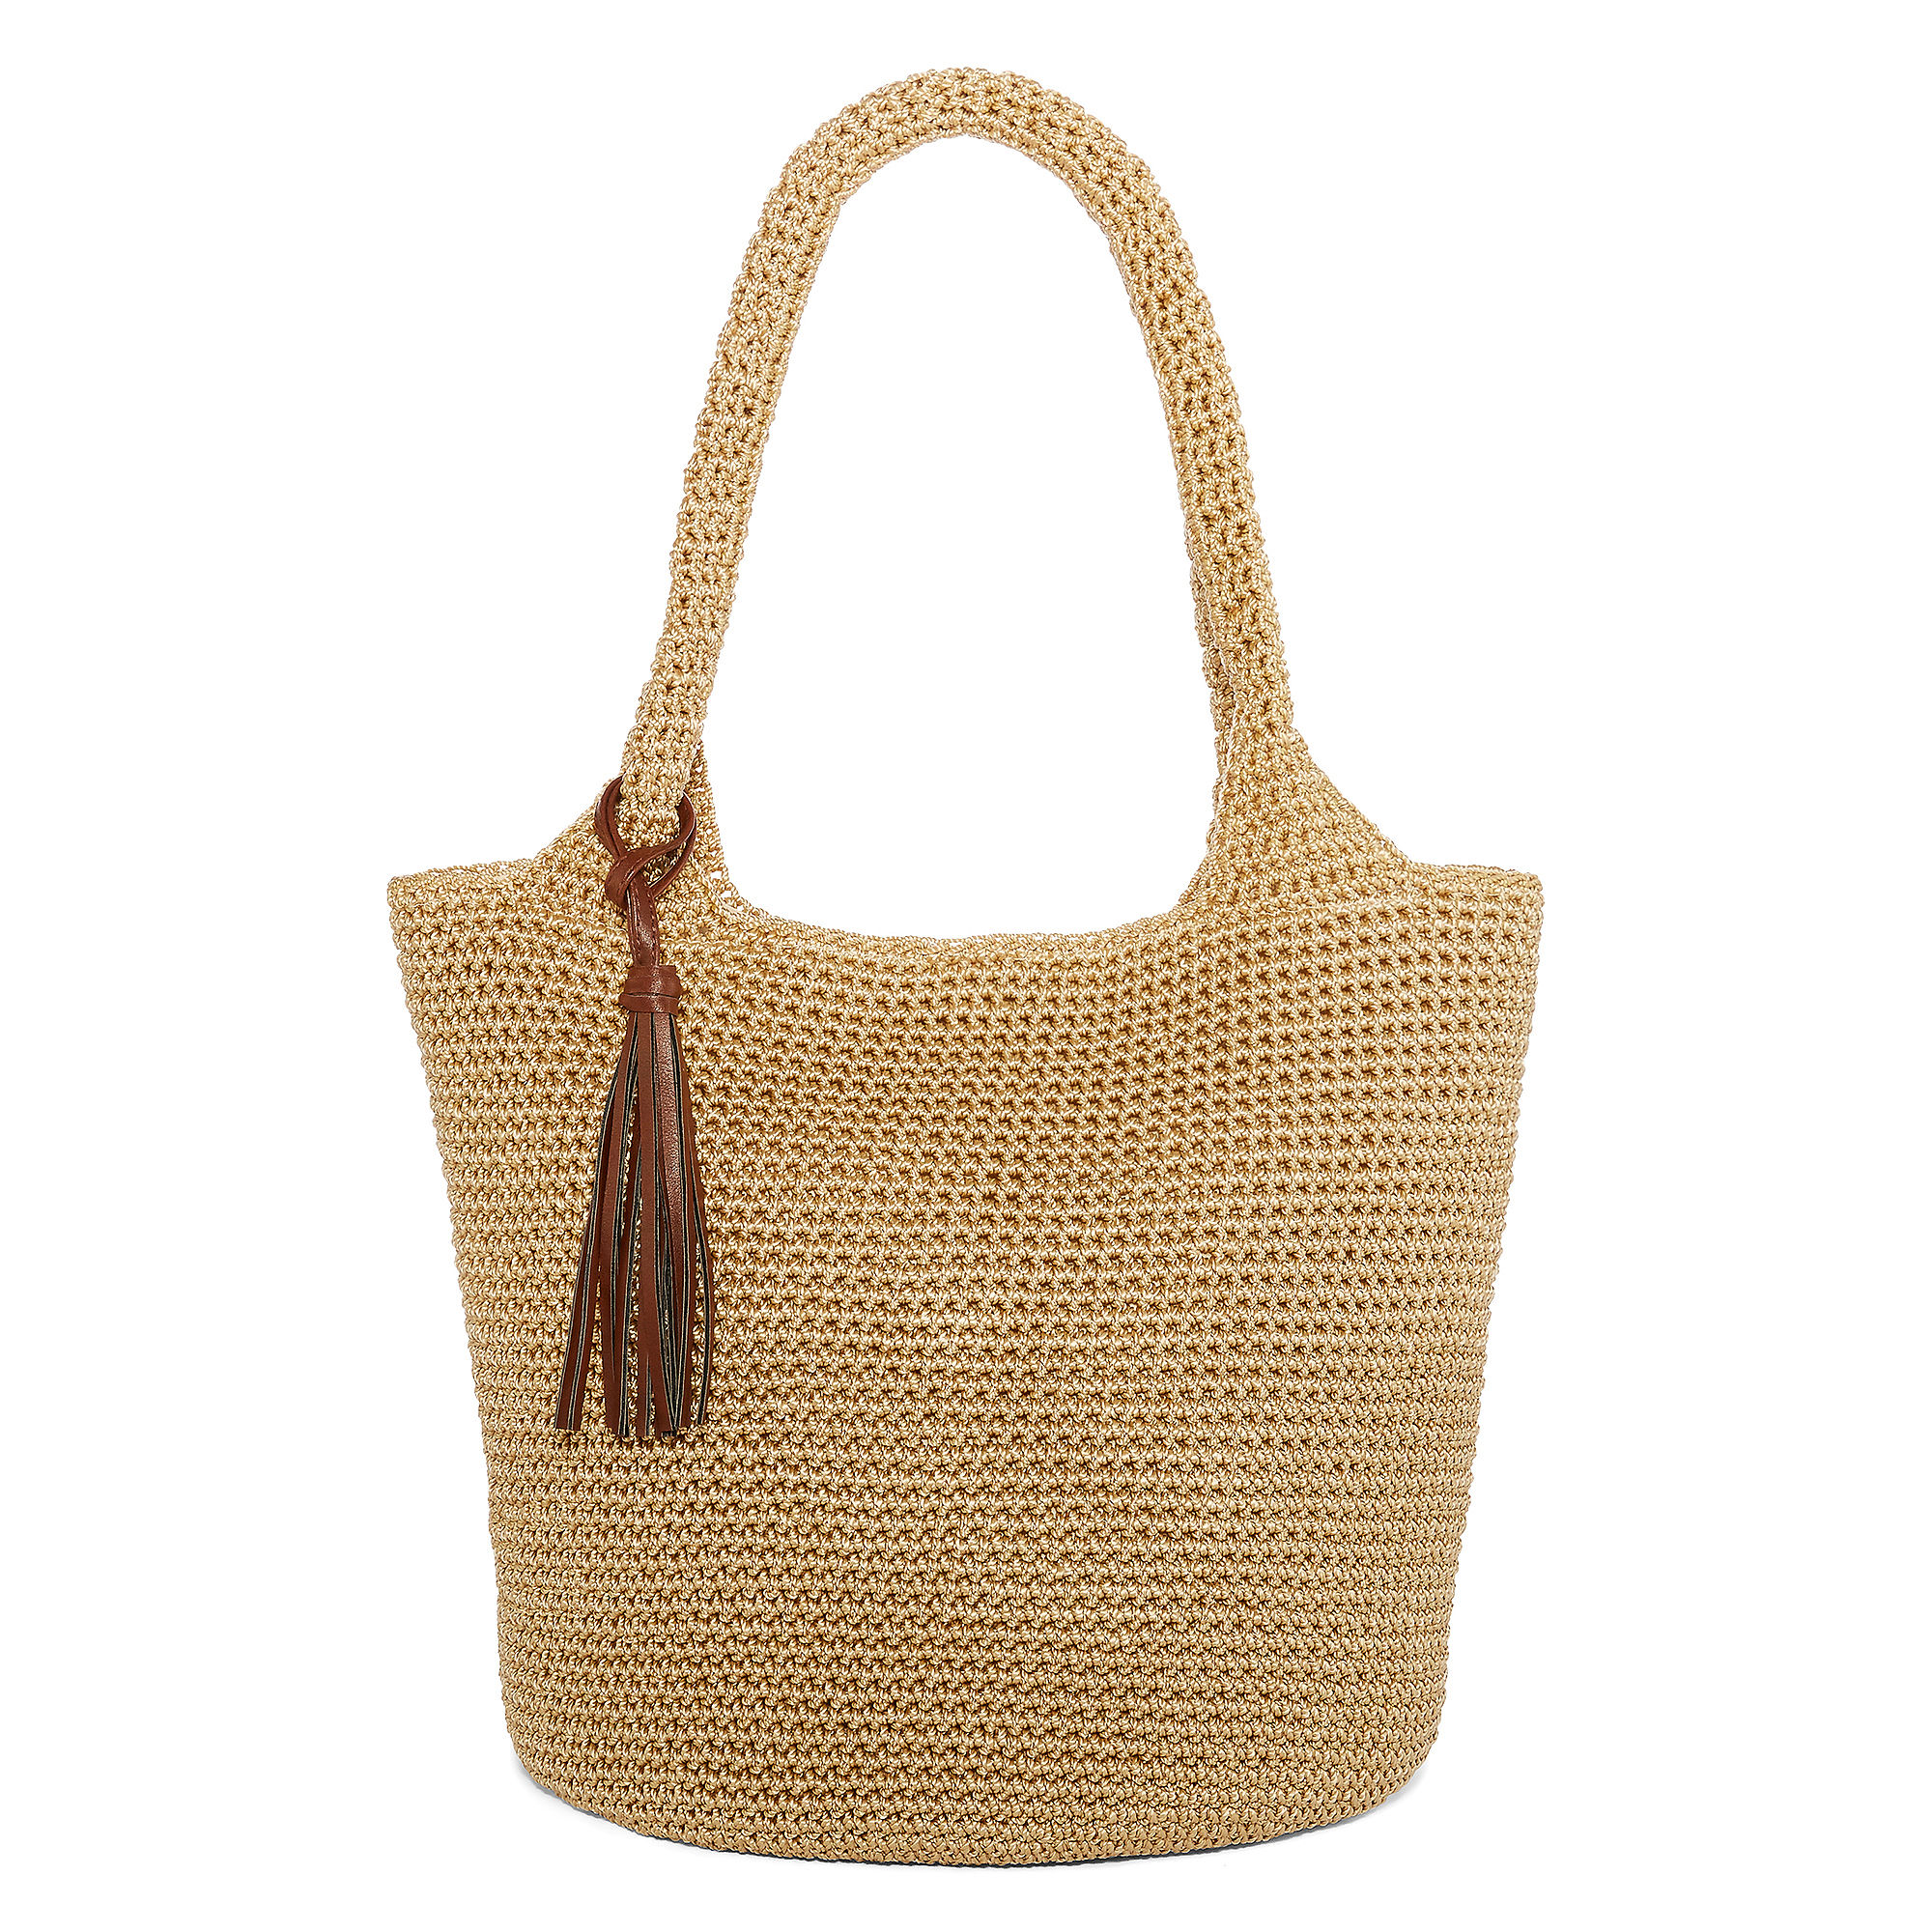 Straw Studios bags. YOOLIFE Mothers Day Gifts - Gifts for Mom, Mom ...